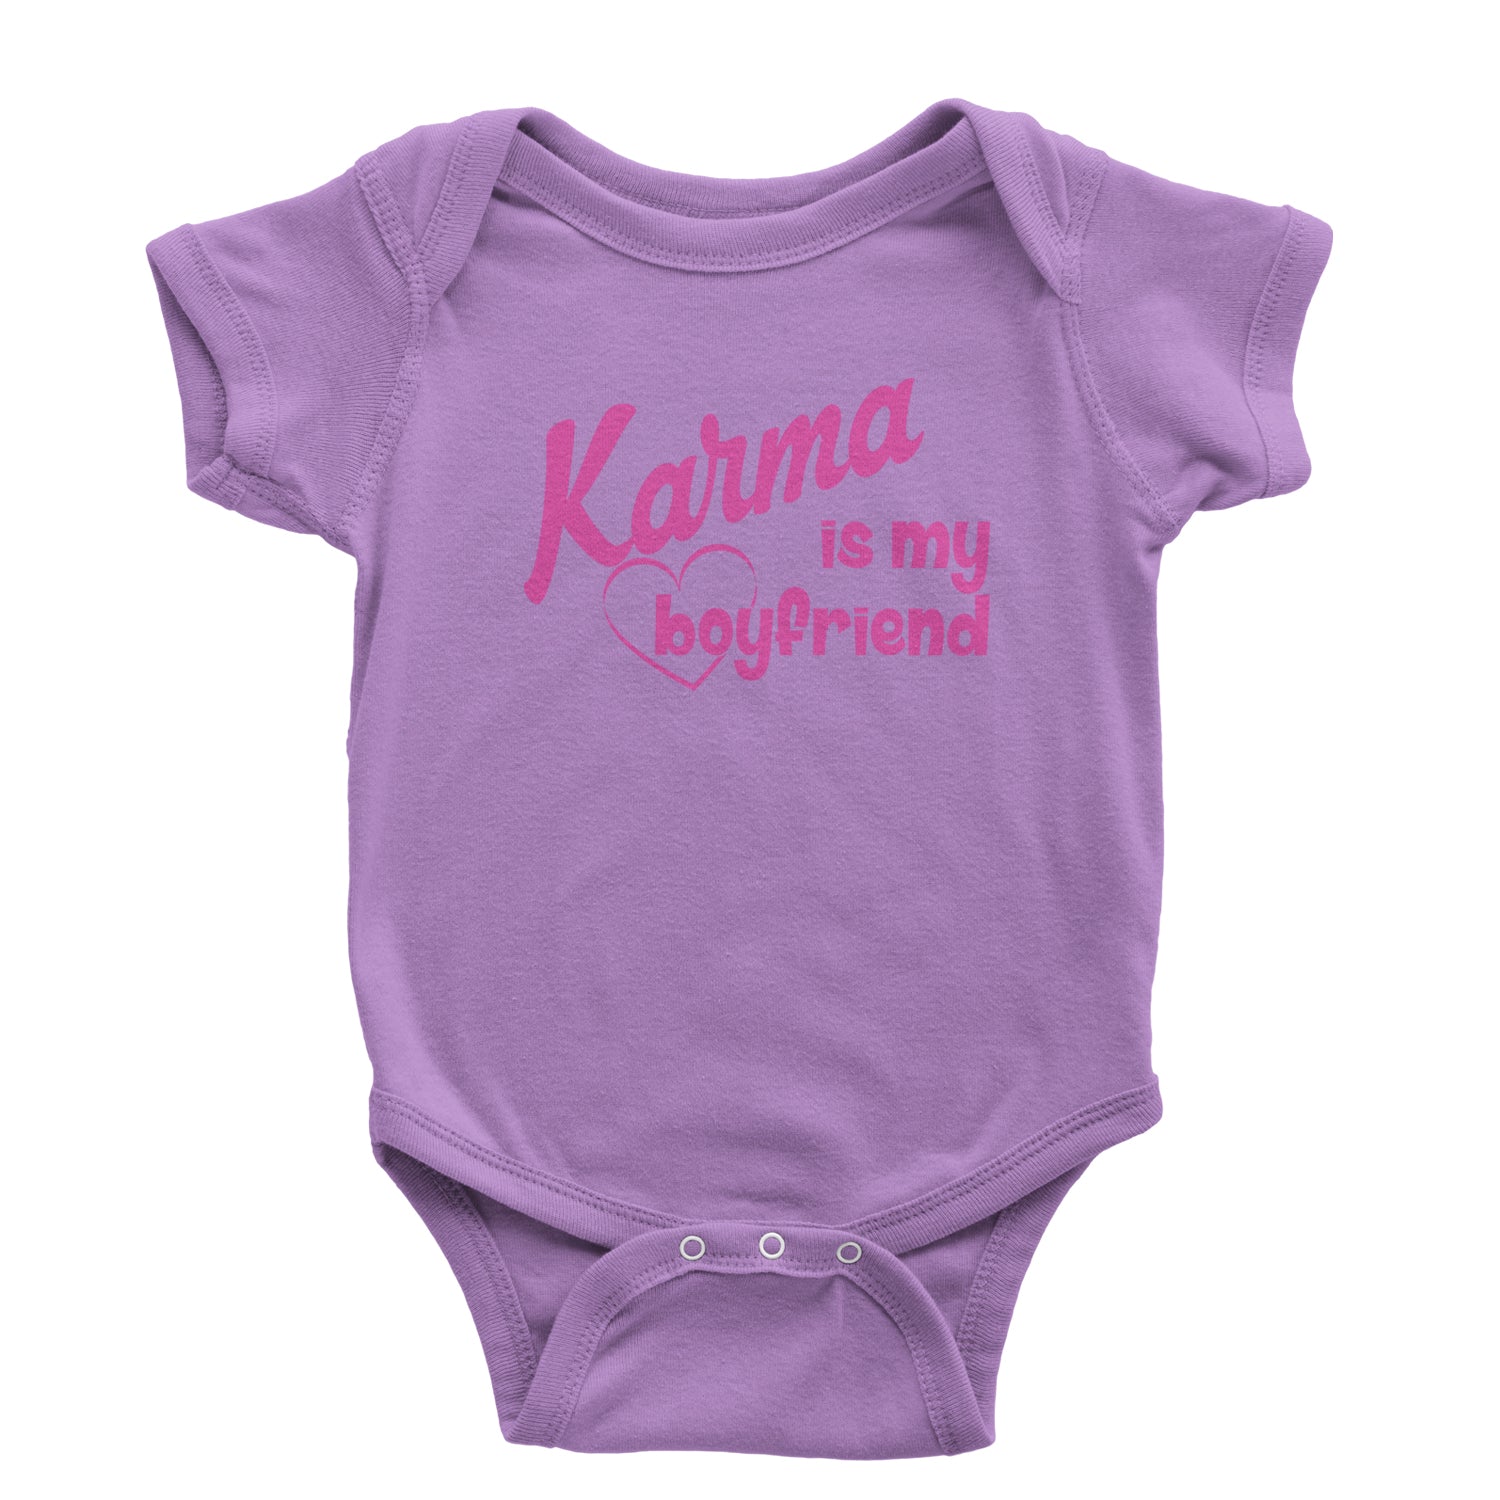 Karma Is My Boyfriend Infant One-Piece Romper Bodysuit and Toddler T-shirt nation, taylornation by Expression Tees